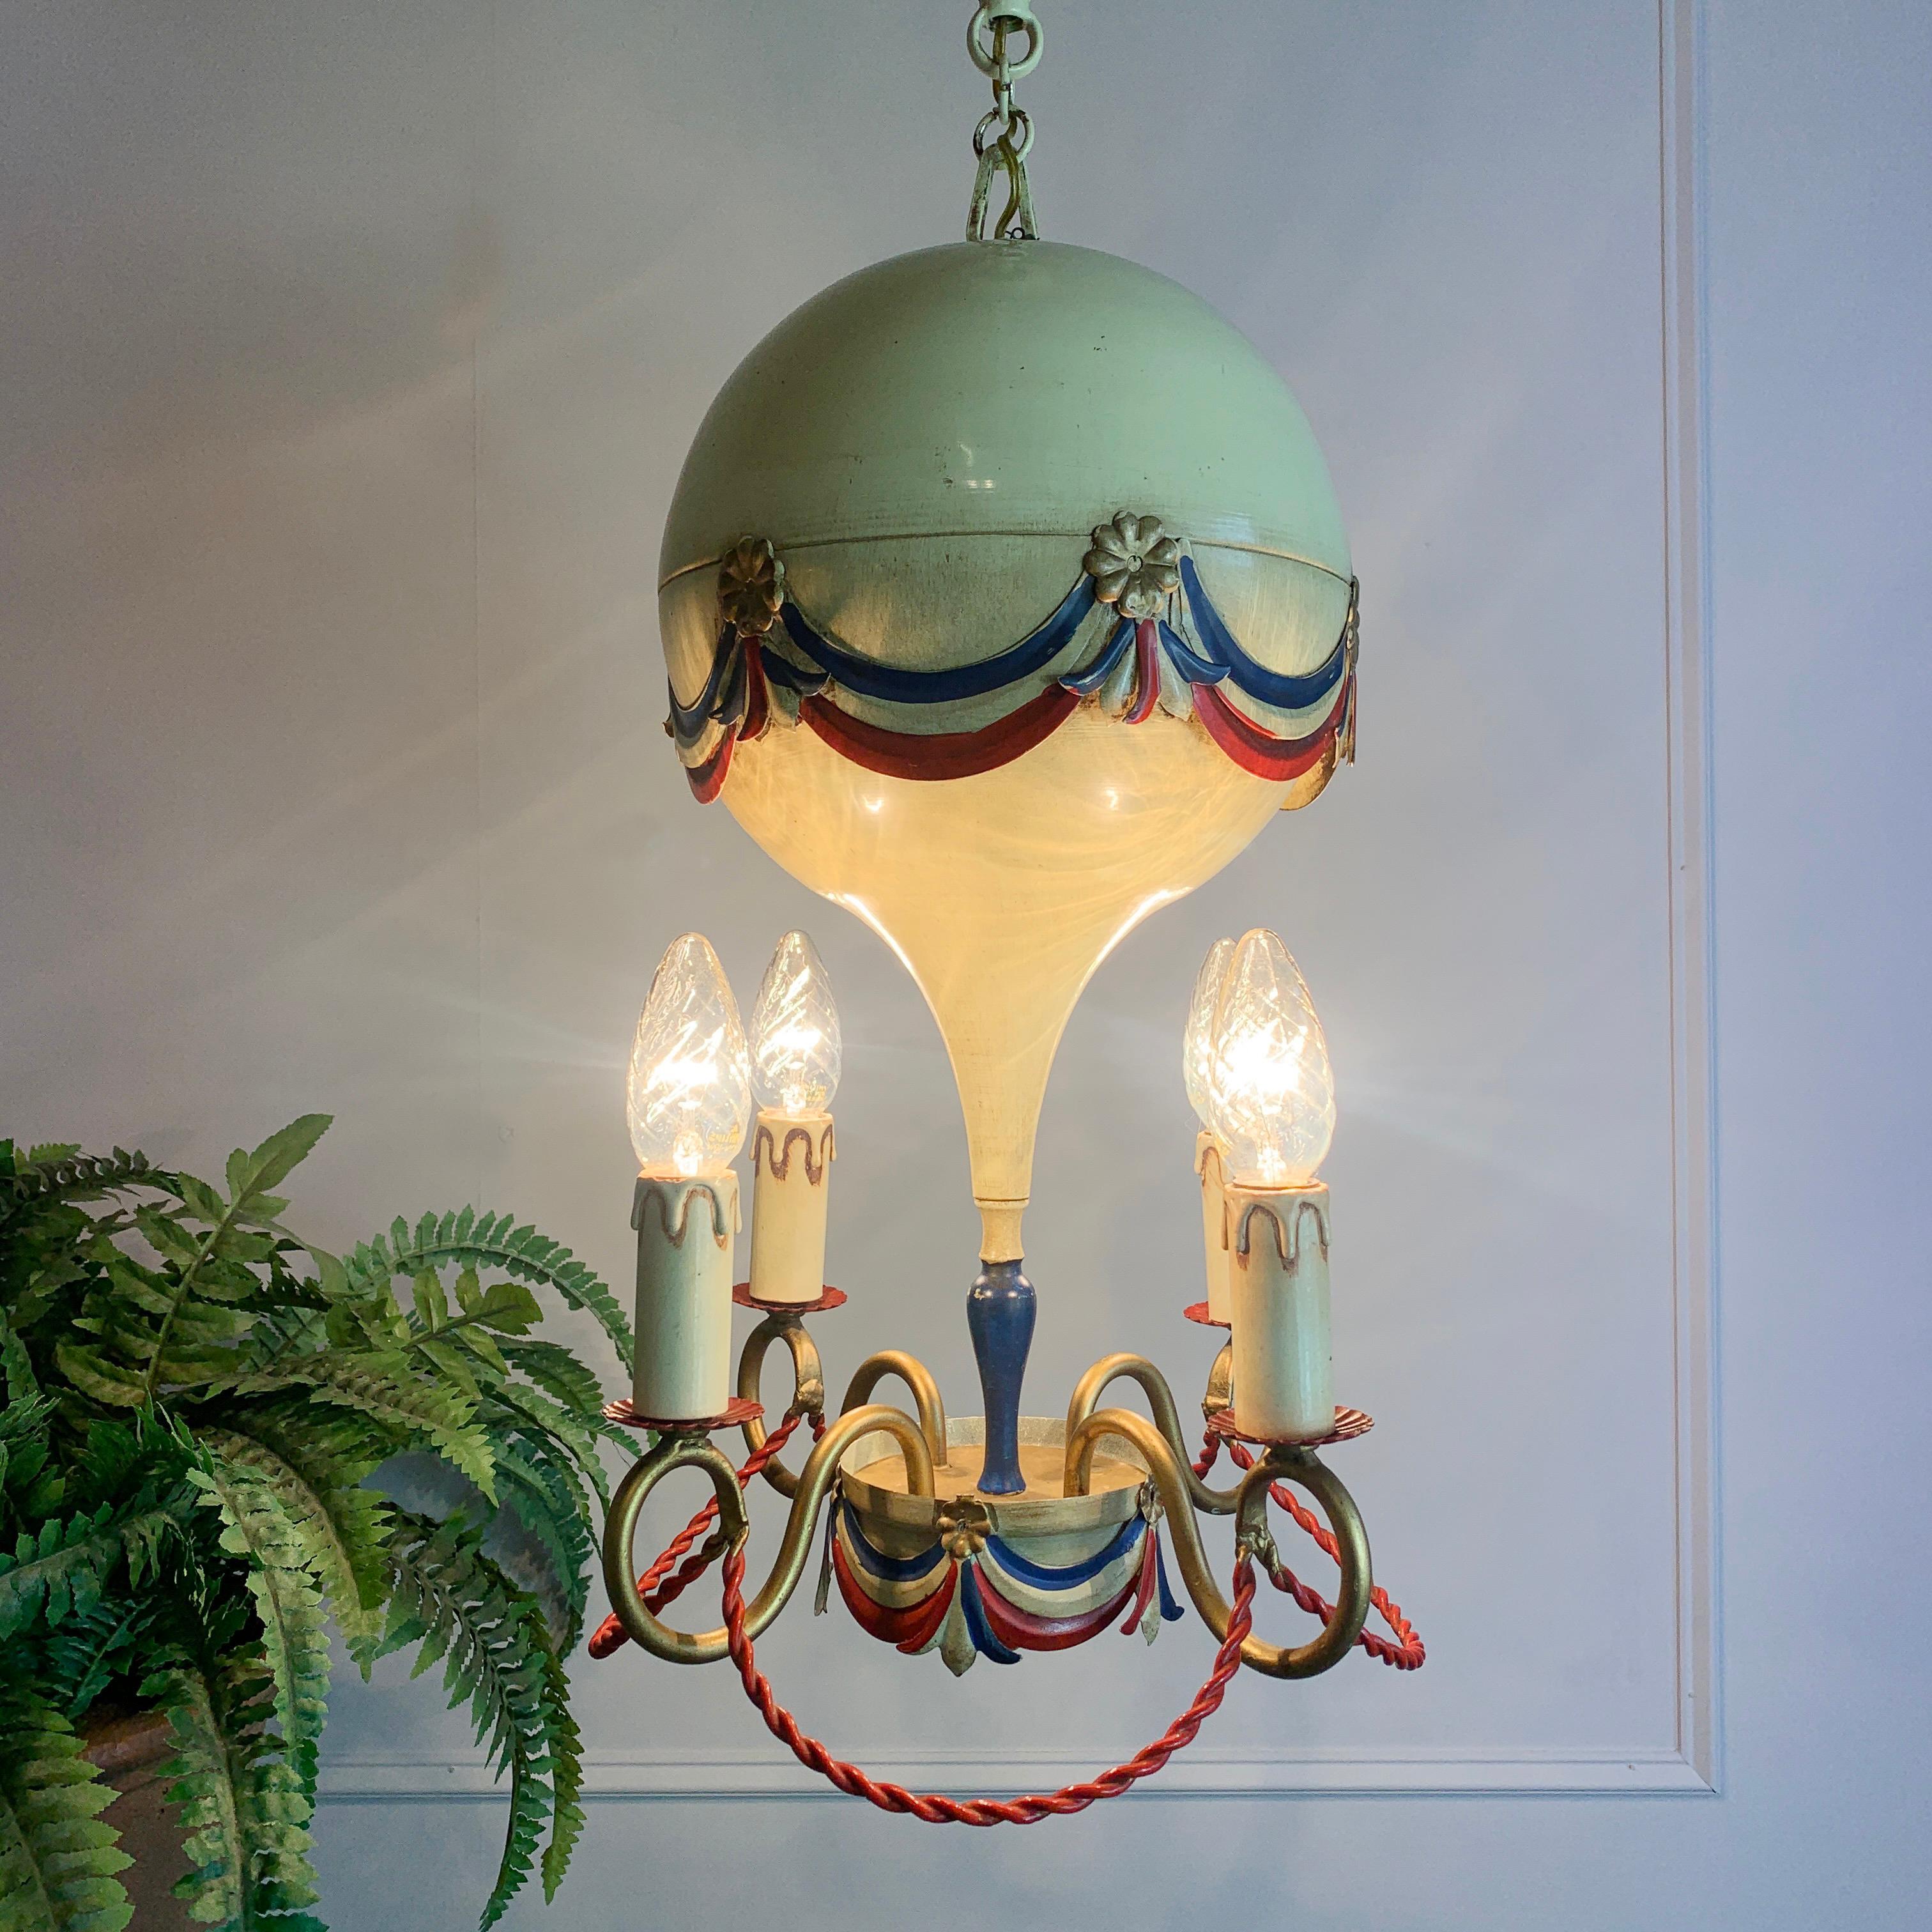 Mid century toleware hot air balloon chandelier, c 1950’s
This stunning light is a rare find in such great original condition
The main balloon body of the light is in full metal with original hand painted swags and rosettes in red, white, blue &